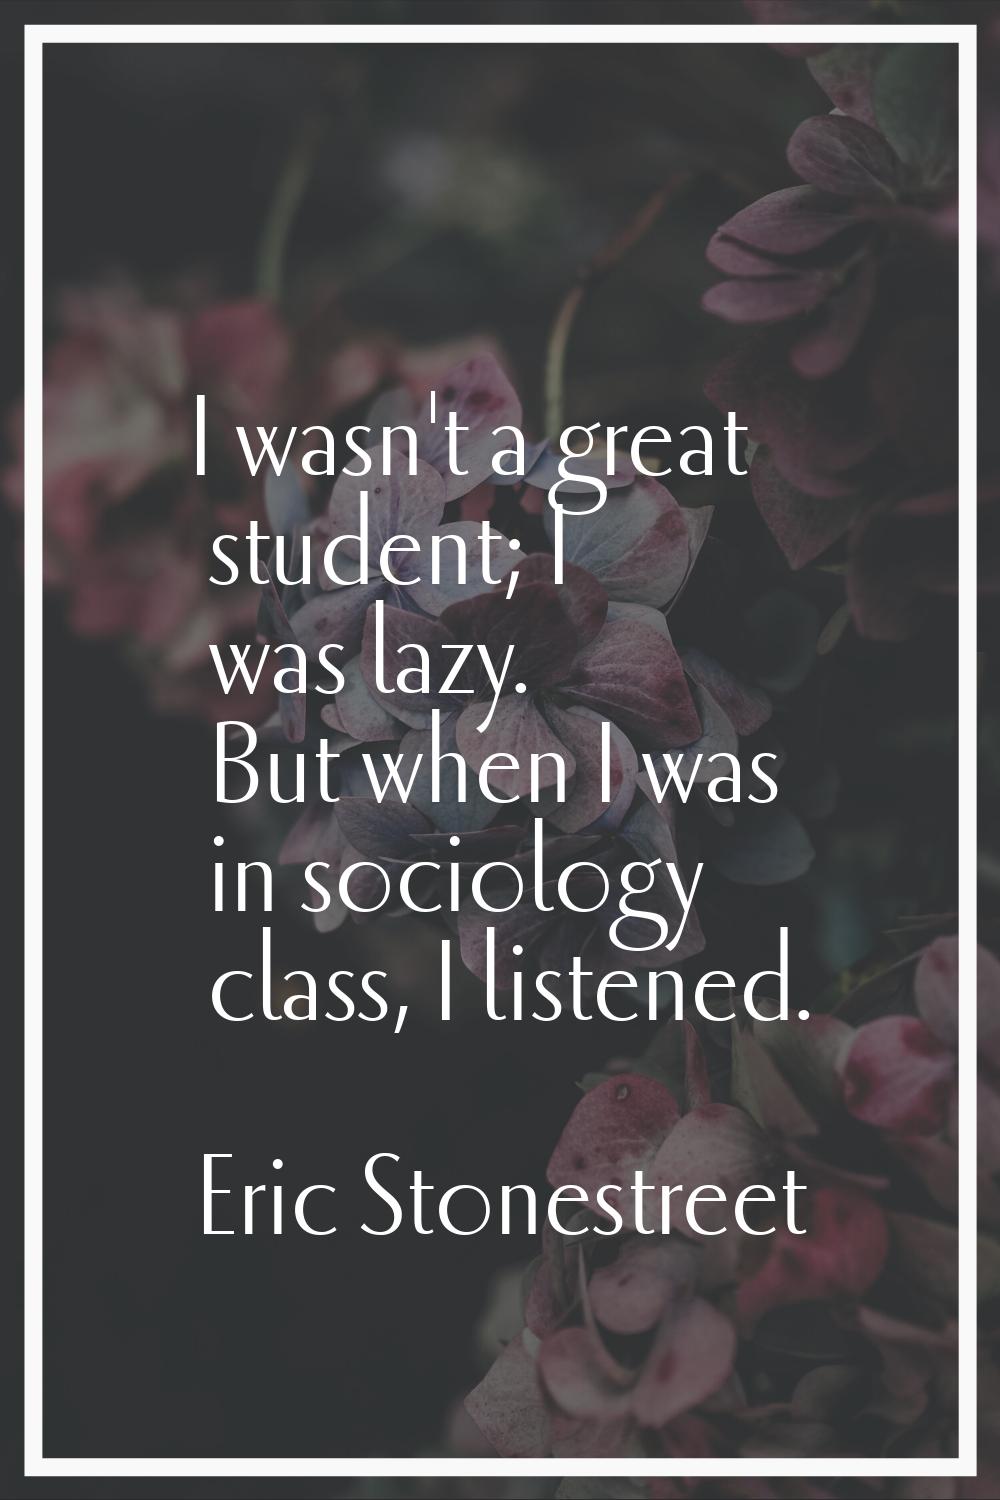 I wasn't a great student; I was lazy. But when I was in sociology class, I listened.